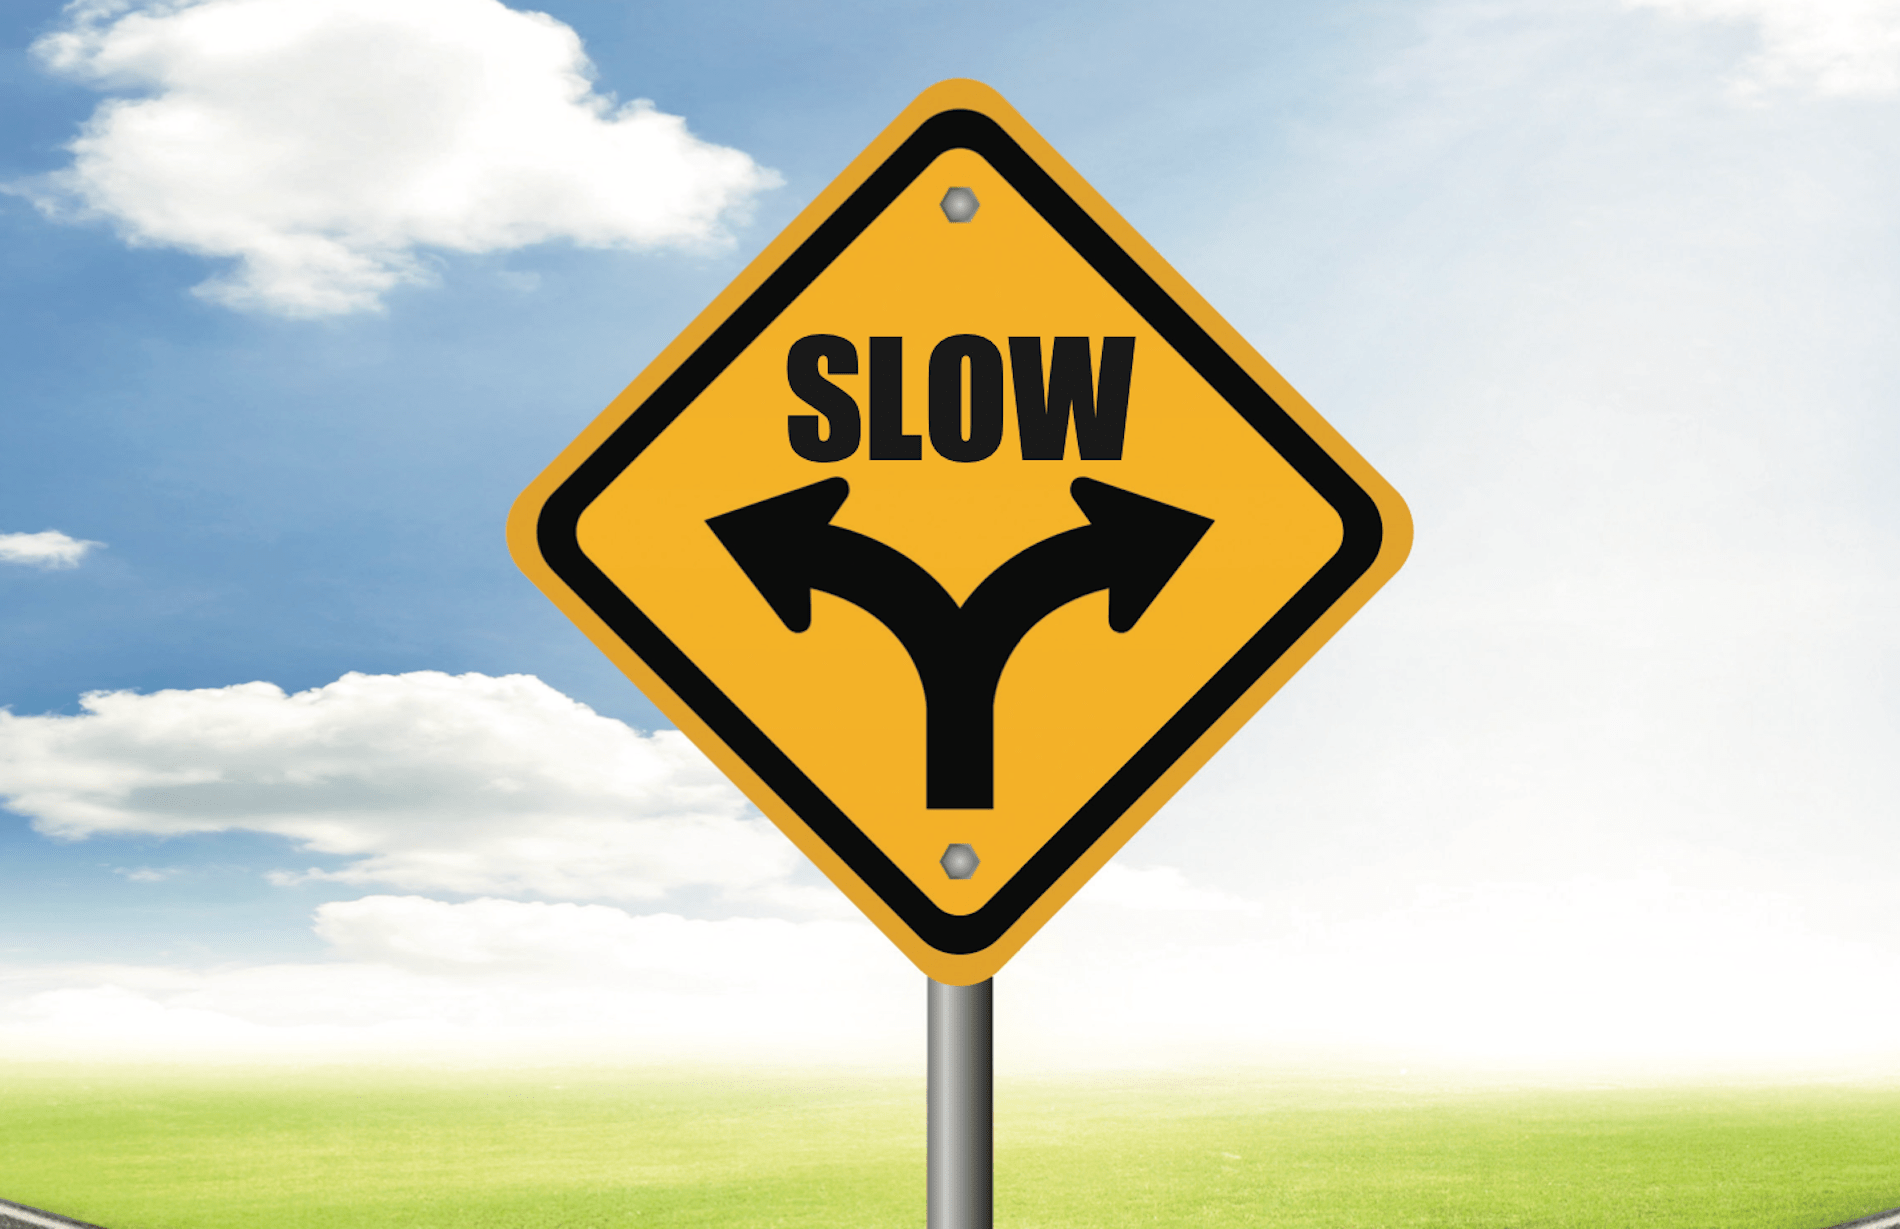 Just like this "go slow" road sign, a slowing housing market requires that home builders adjust their approach